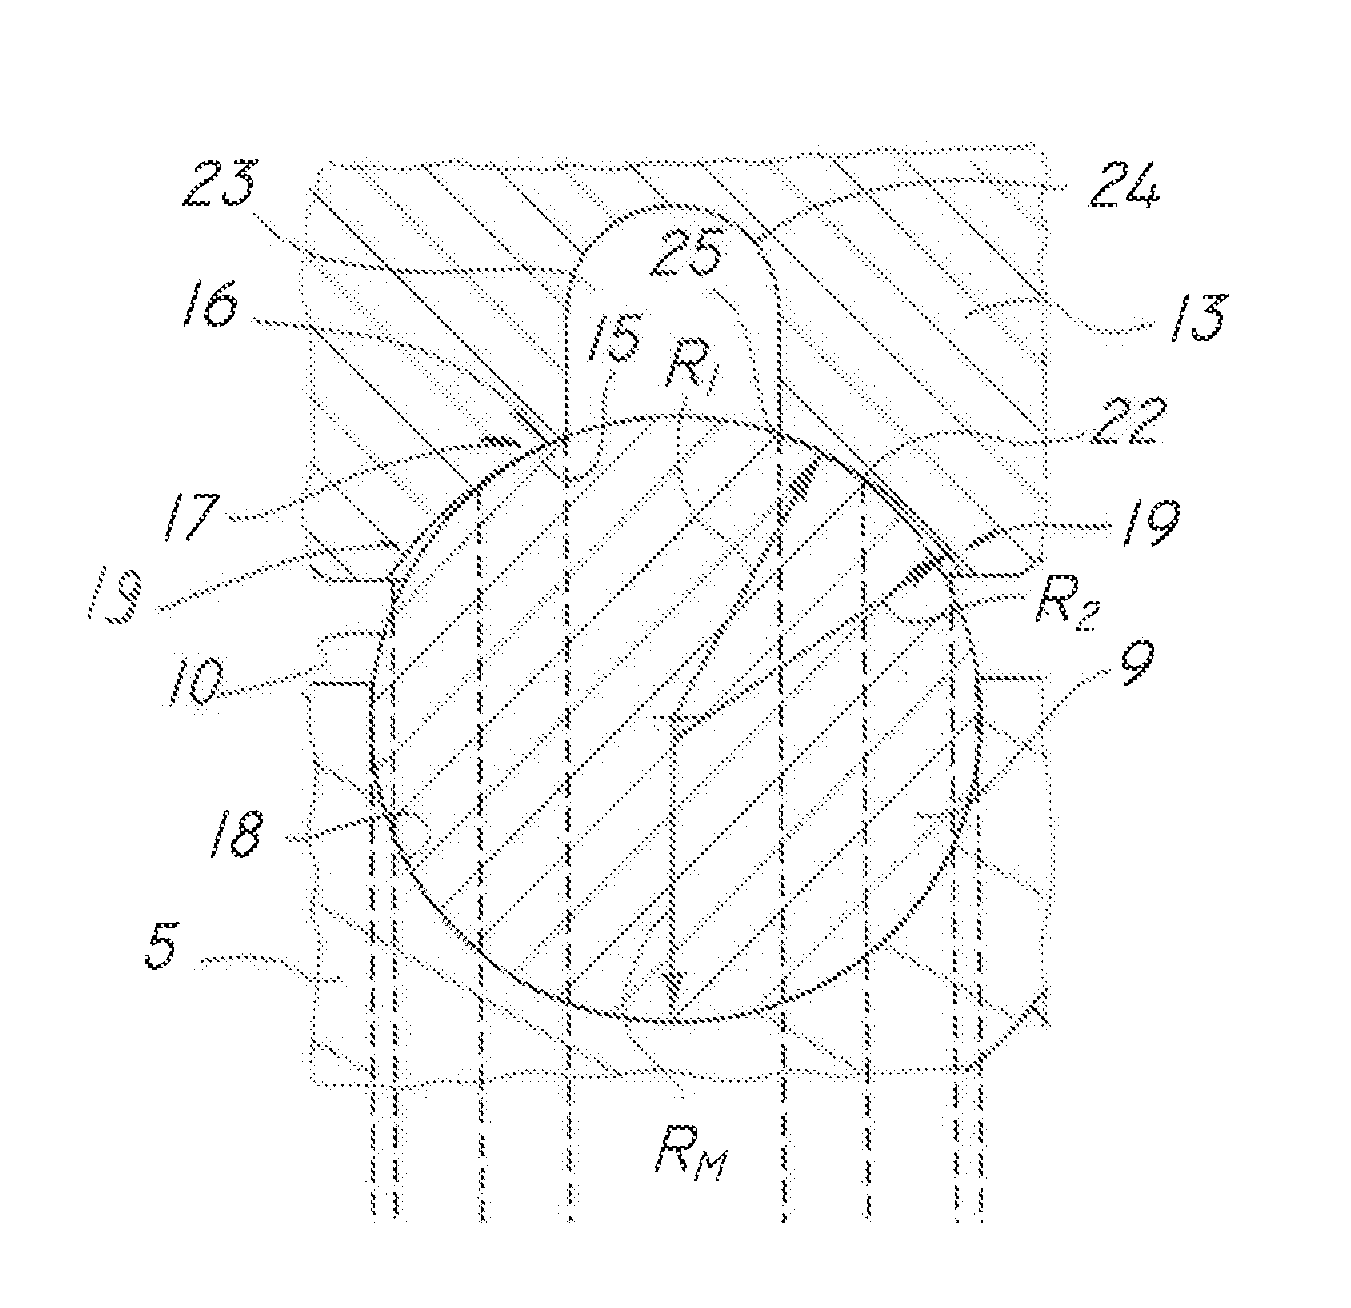 Liquid diffuser device for irrigation systems